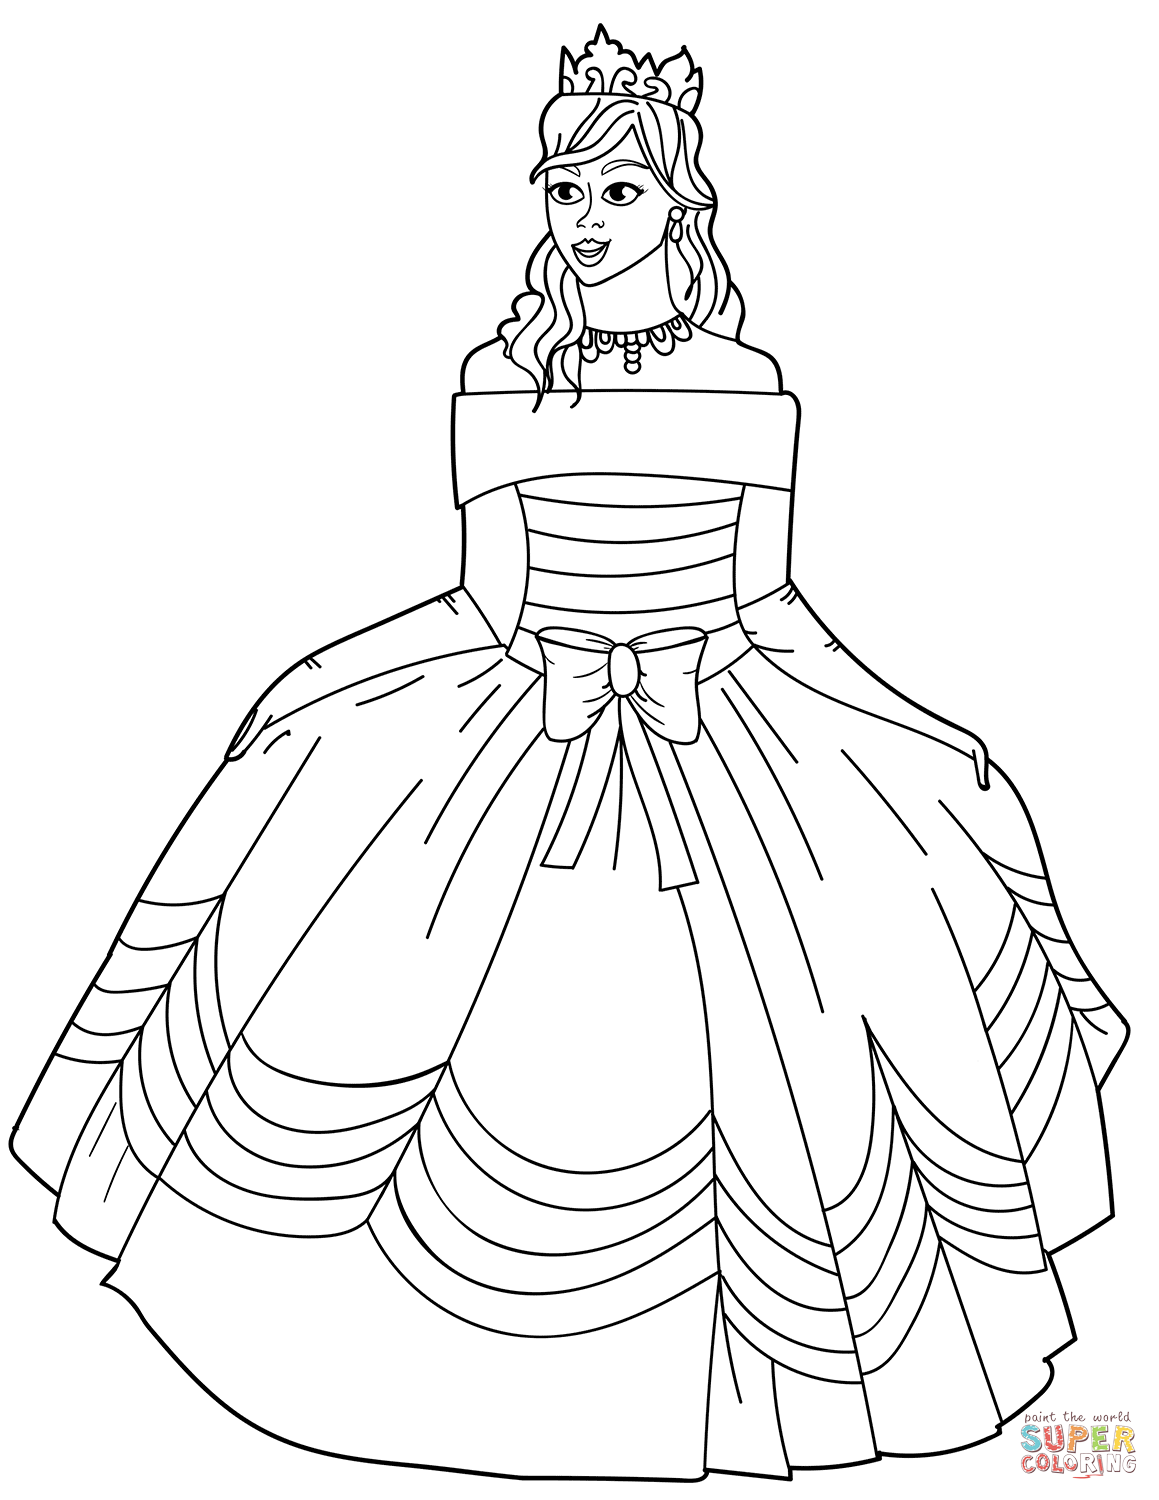 Princess in Ball Gown Off-the-Shoulder Dress coloring page | Free Printable Coloring  Pages